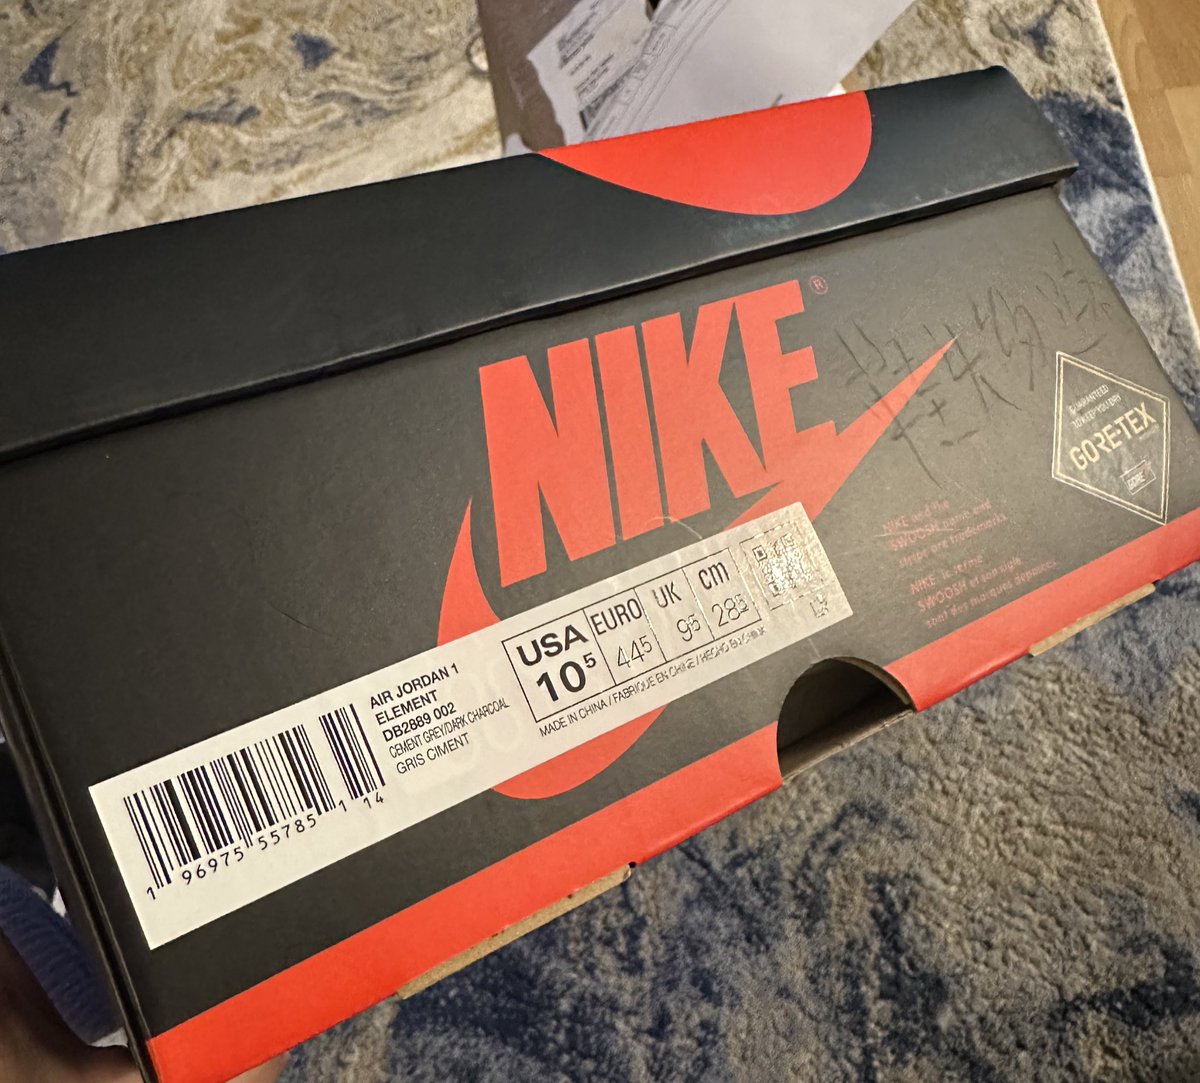 Soooo…. Got a #mailcall from @DTLRVILLA. 
Anyone want to translate this foreign text on my box??? 
Never had that before 🤔??????
Shoes are beautiful, no complaints there 🔥💯
@Jumpman23 @Nike #questions #AJ1 #Goretex1s